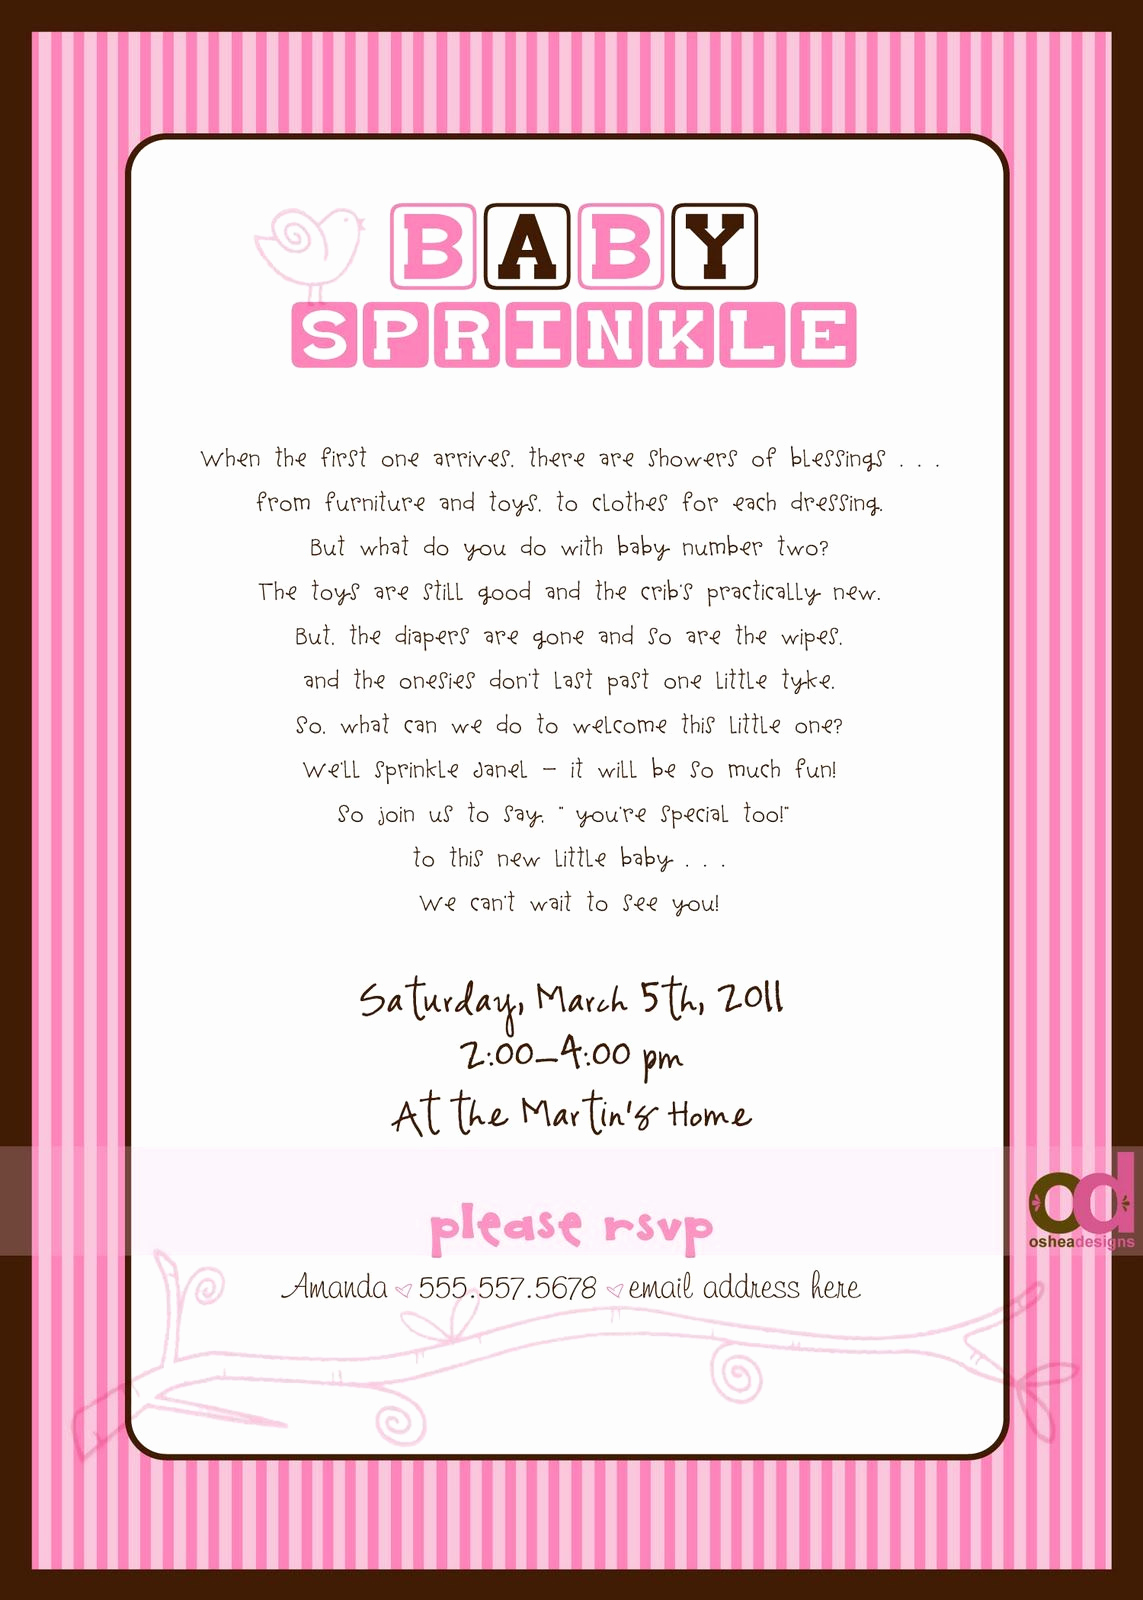 Baby Shower Invitation Wording Luxury &quot;sprinkle&quot; Invitations Wording Wish I Would Have Found